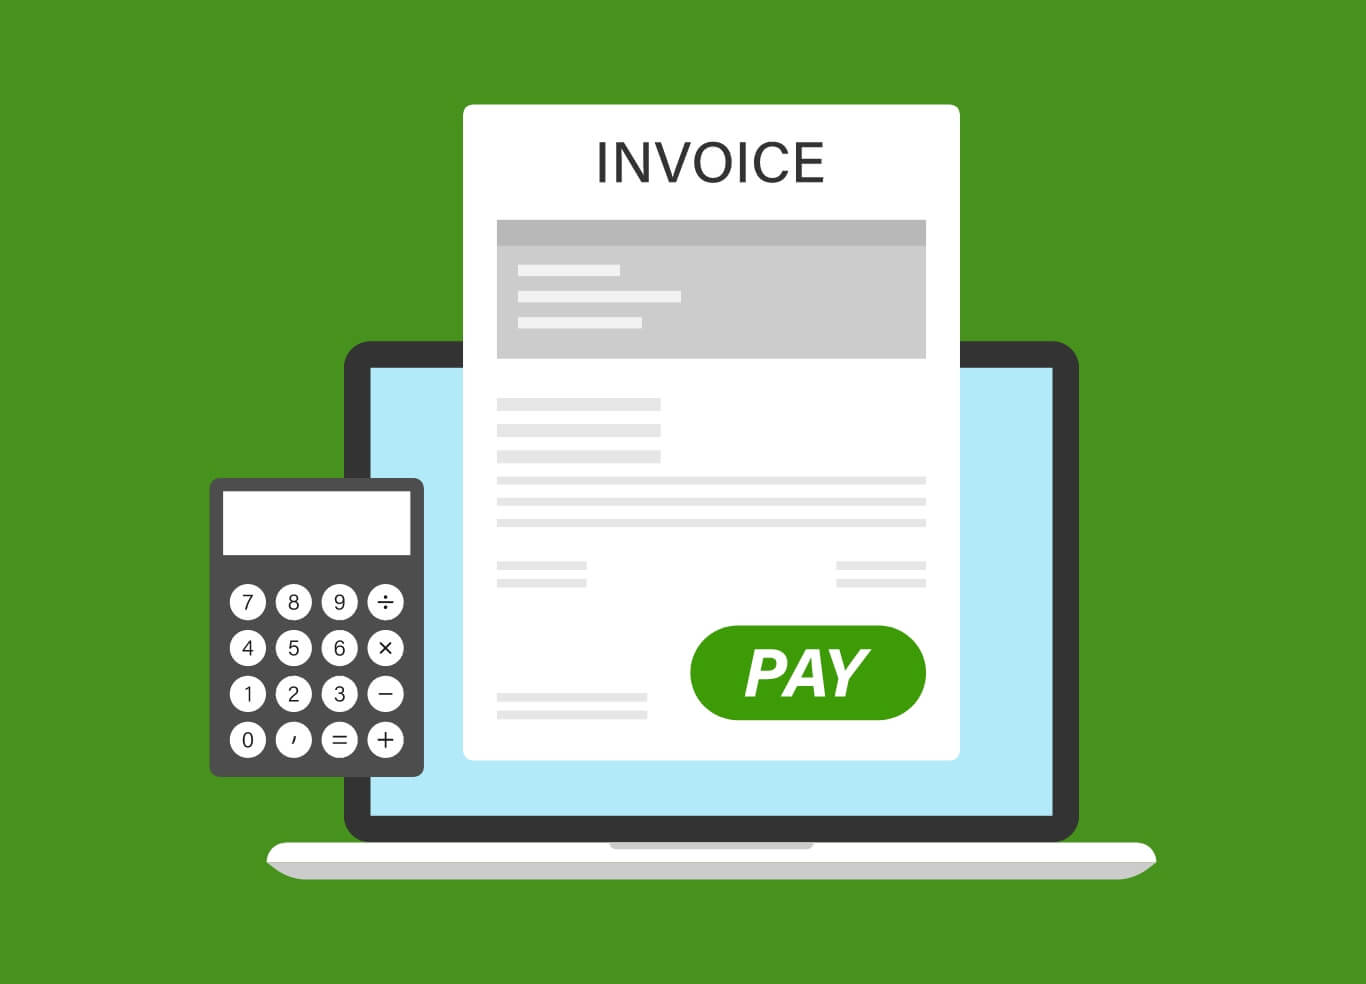 How Invoice Digitization Can Streamline Process for Customers and Supplier